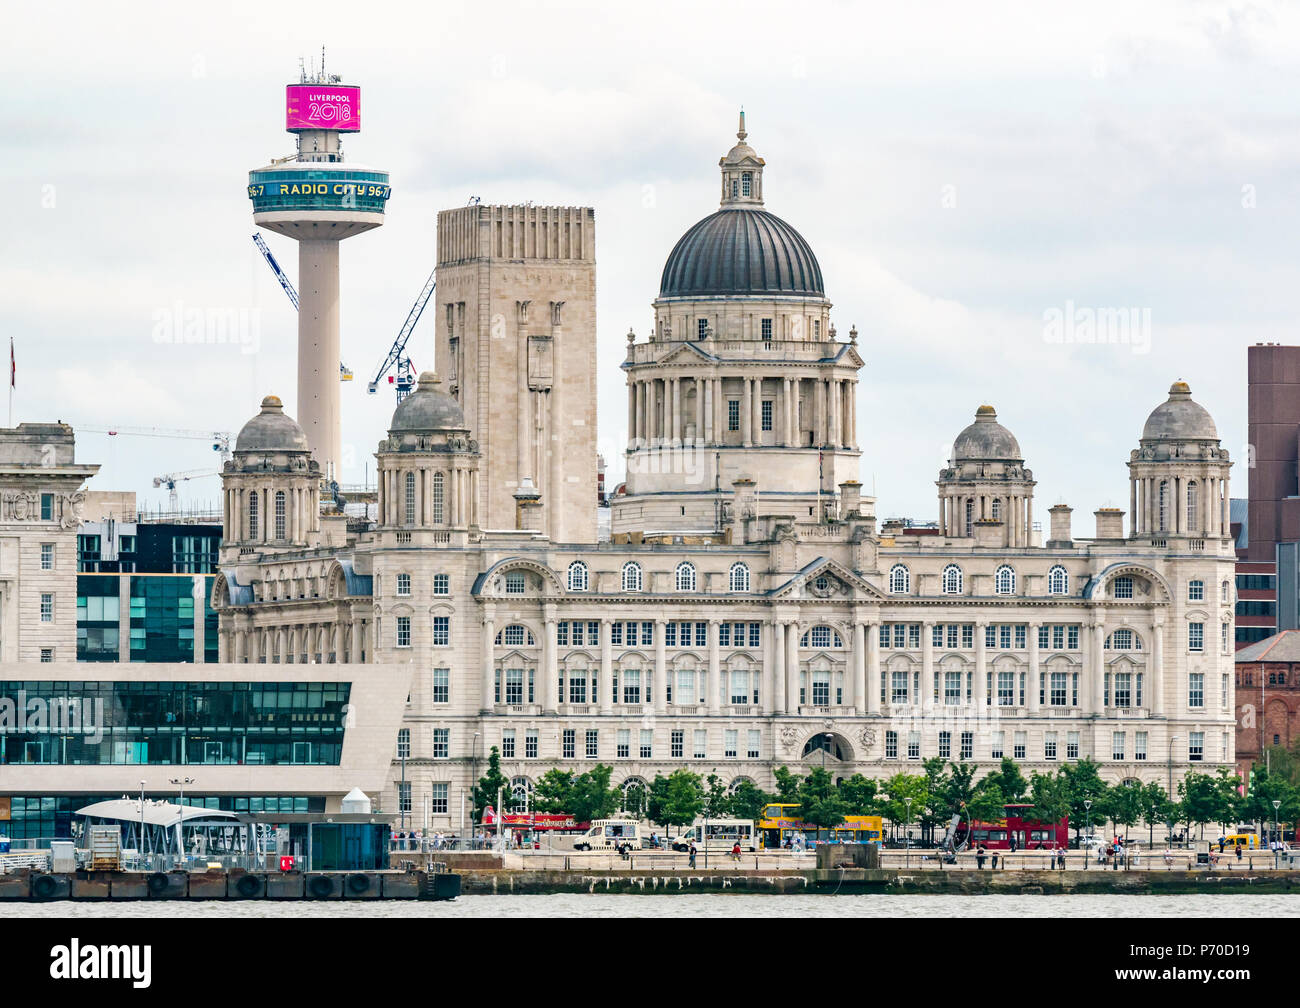 St John's Beacon Radio City observation tower and grand domed Edwardian baroque style Port of Liverpool building, riverside, Liverpool, England, UK Stock Photo